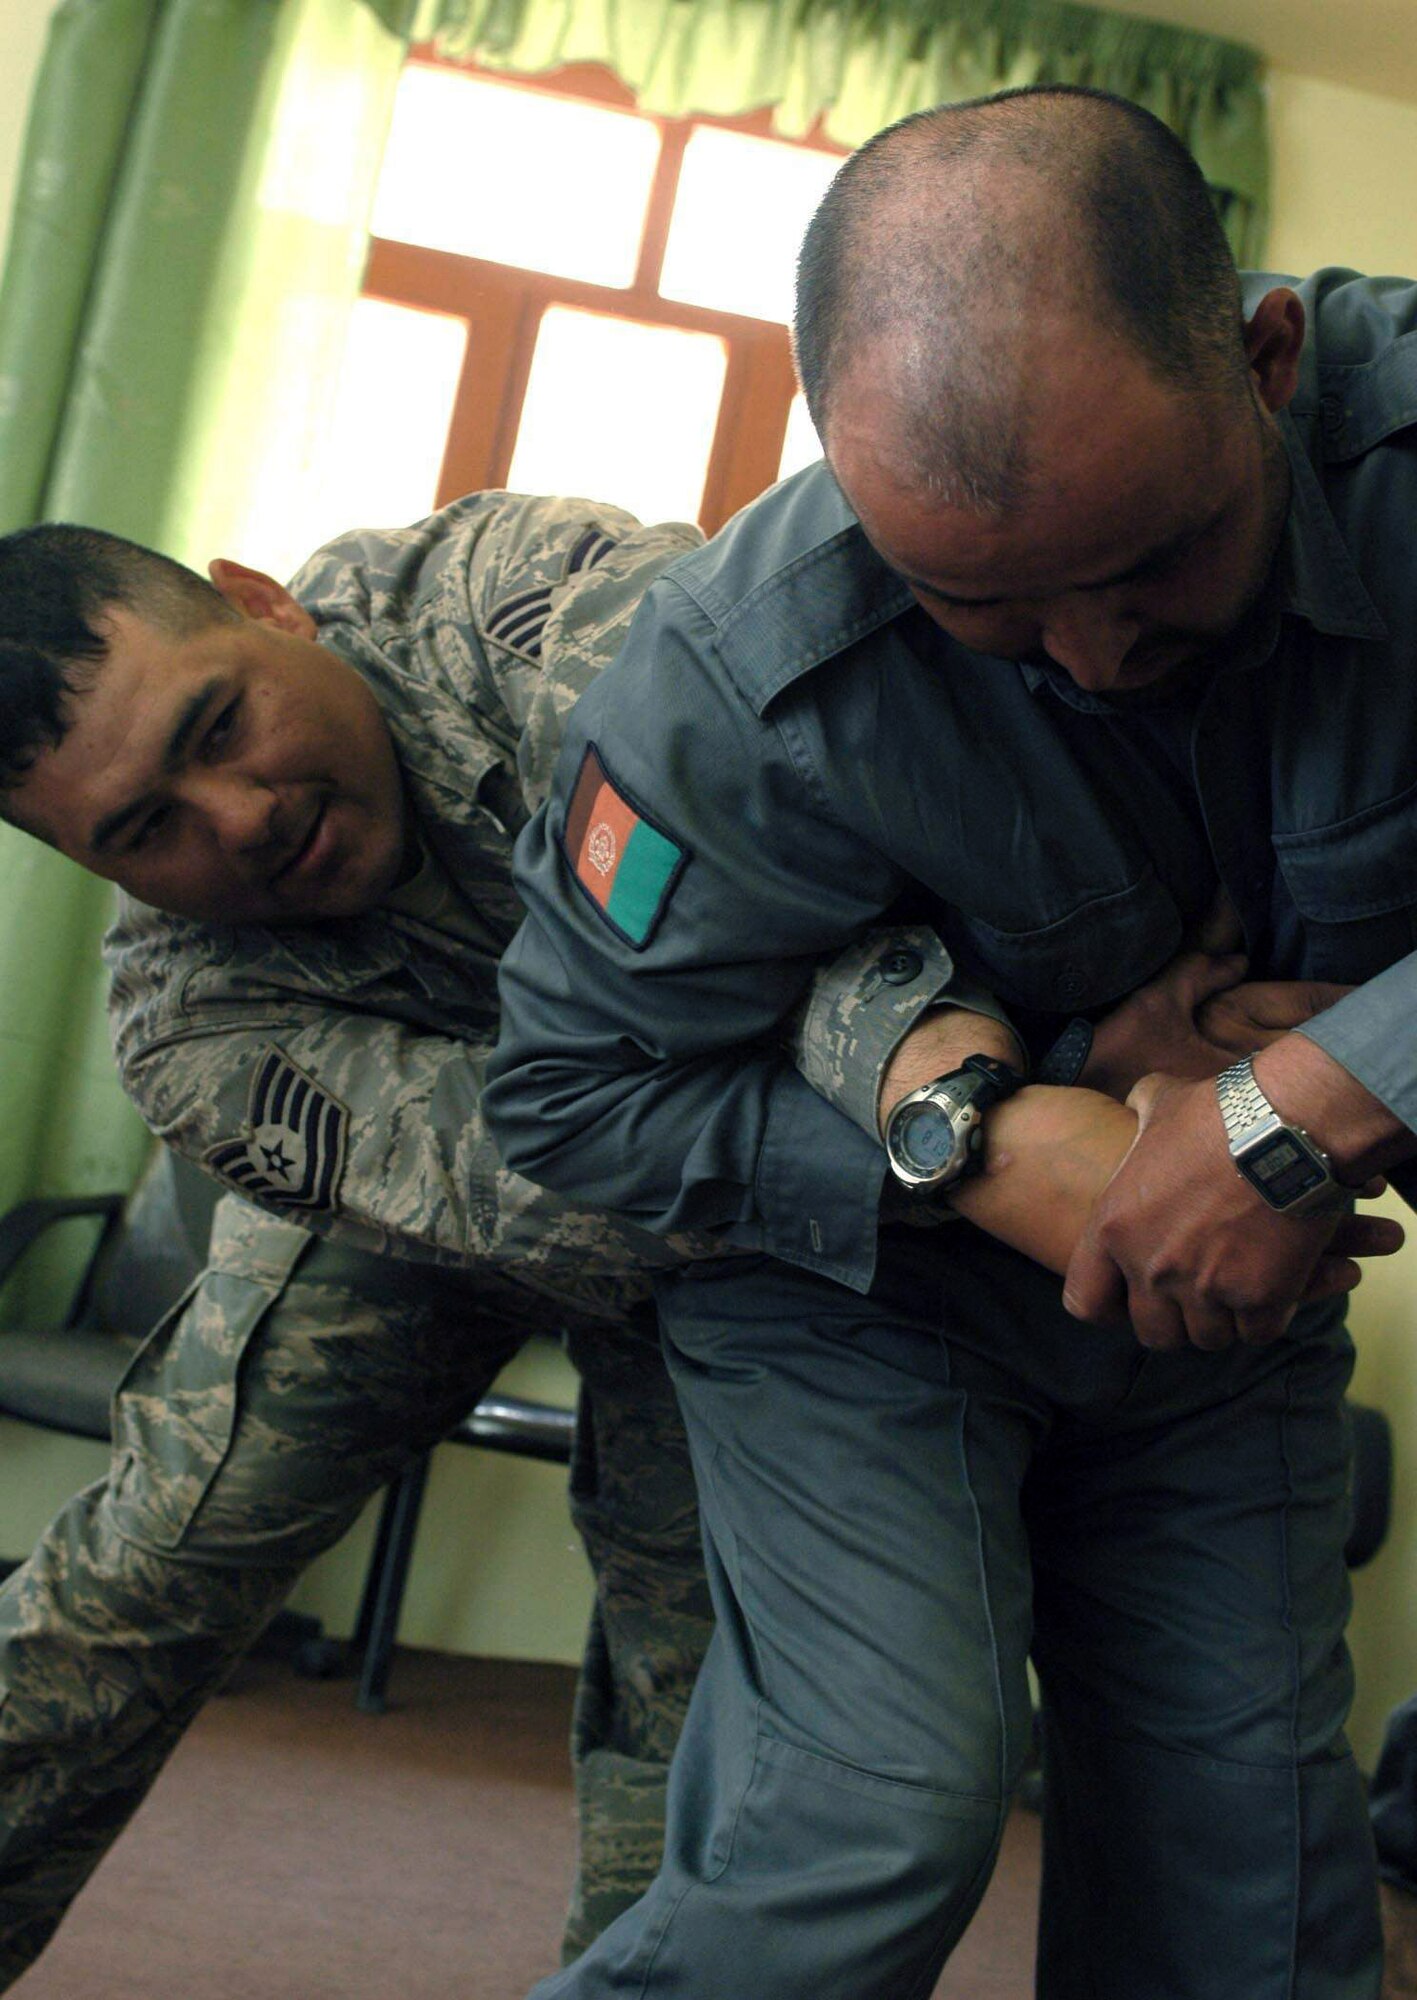 Tech. Sgt. Chris Padron demonstrates a restraint technique for a member of the Afgahnistan National Police as part of a training class held May 8 at Dandar village, in the Parwan province of Afghanistan. Access to resource control was also taught during the training. Sergeant Padron is a Provincial Reconstruction Team member deployed from Cannon Air Force Base, N.M. (U.S. Air Force photo)